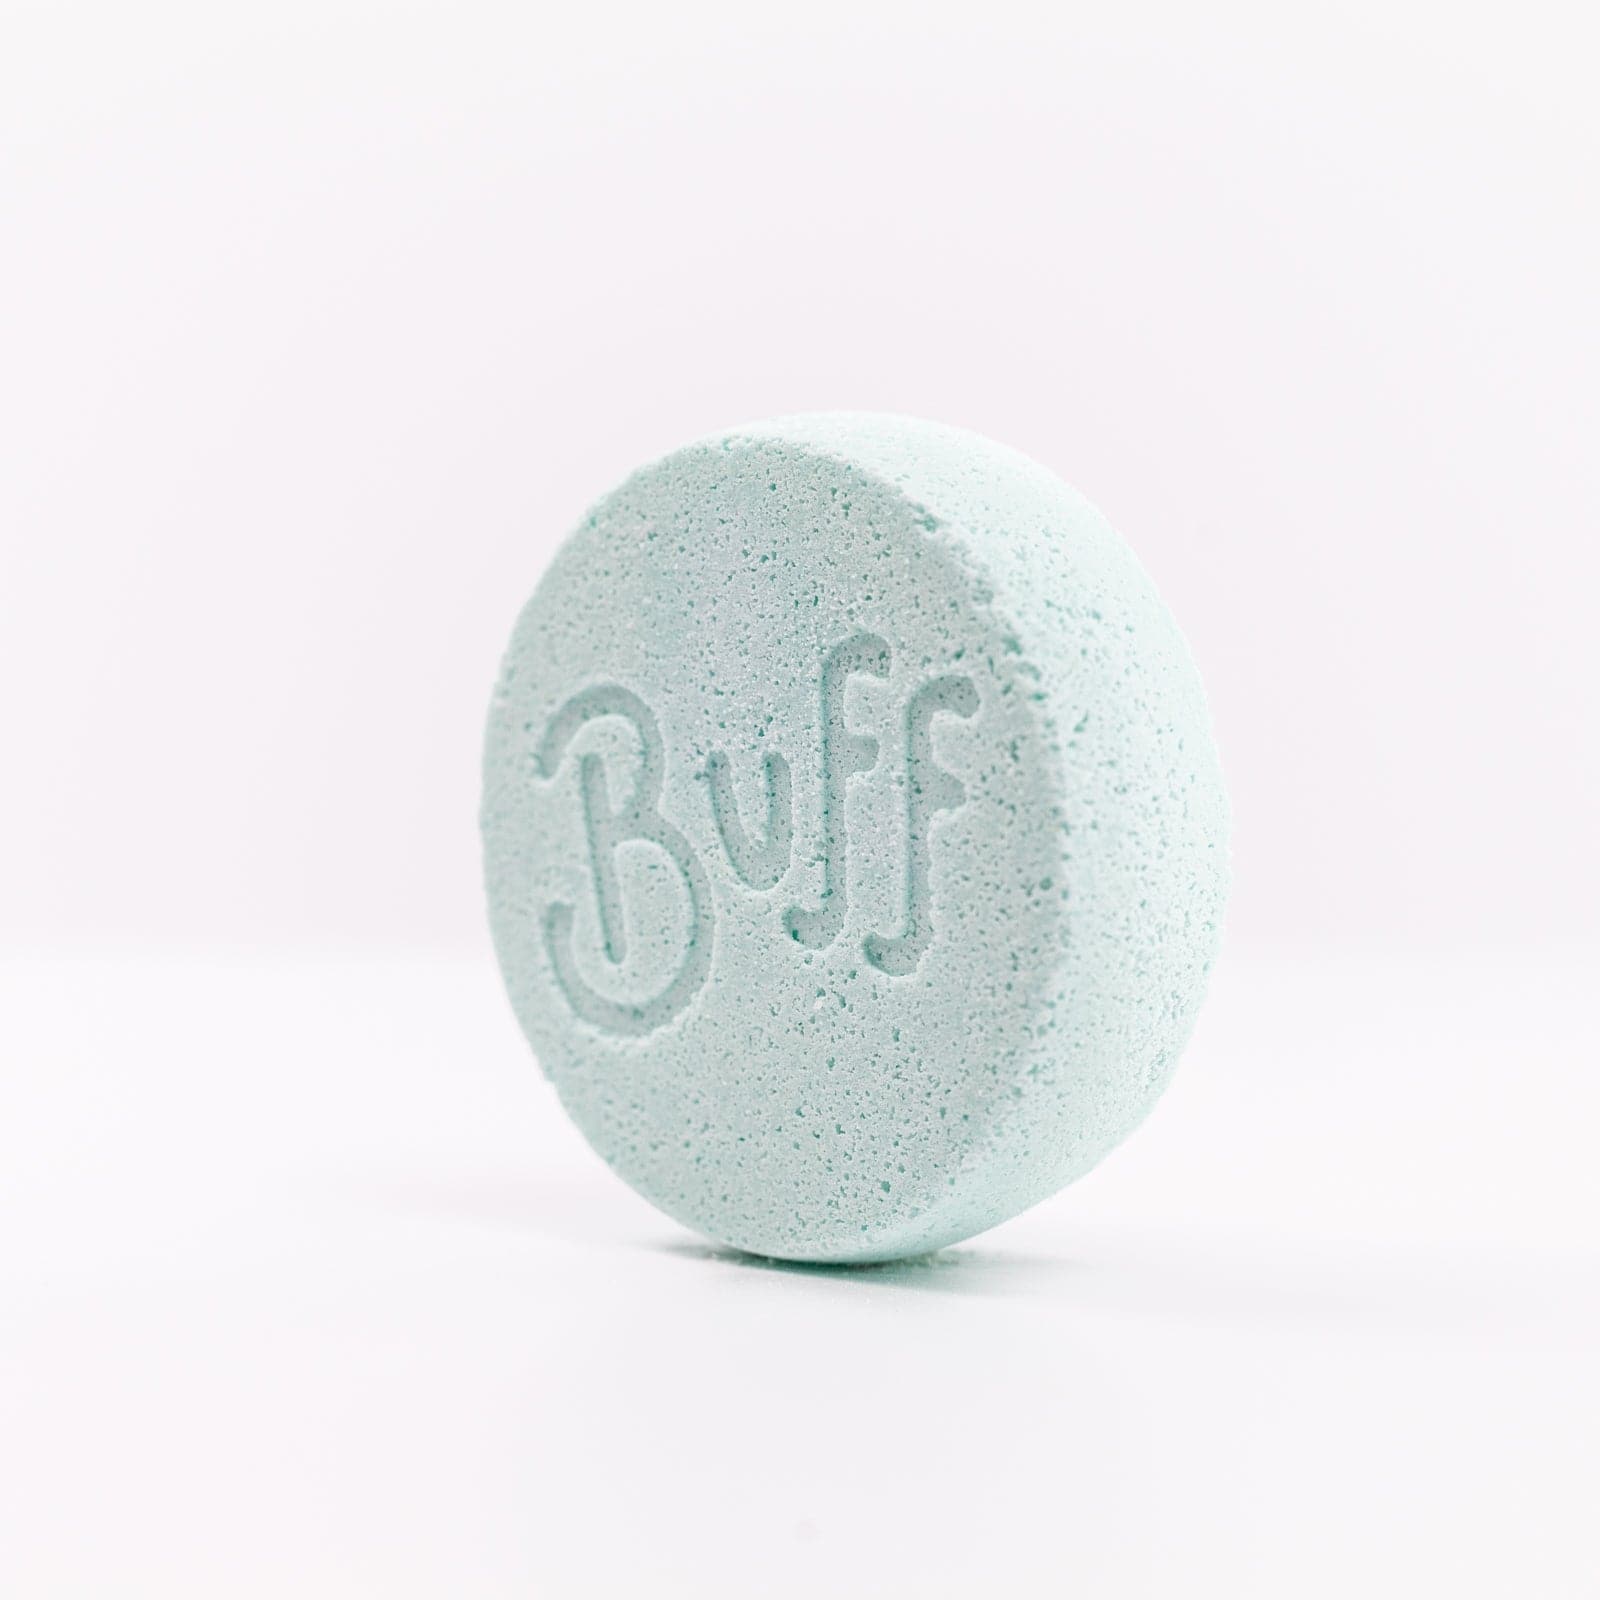 angled left view of light blue Narcissist Shower Fizzy with "Buff" engraved in it